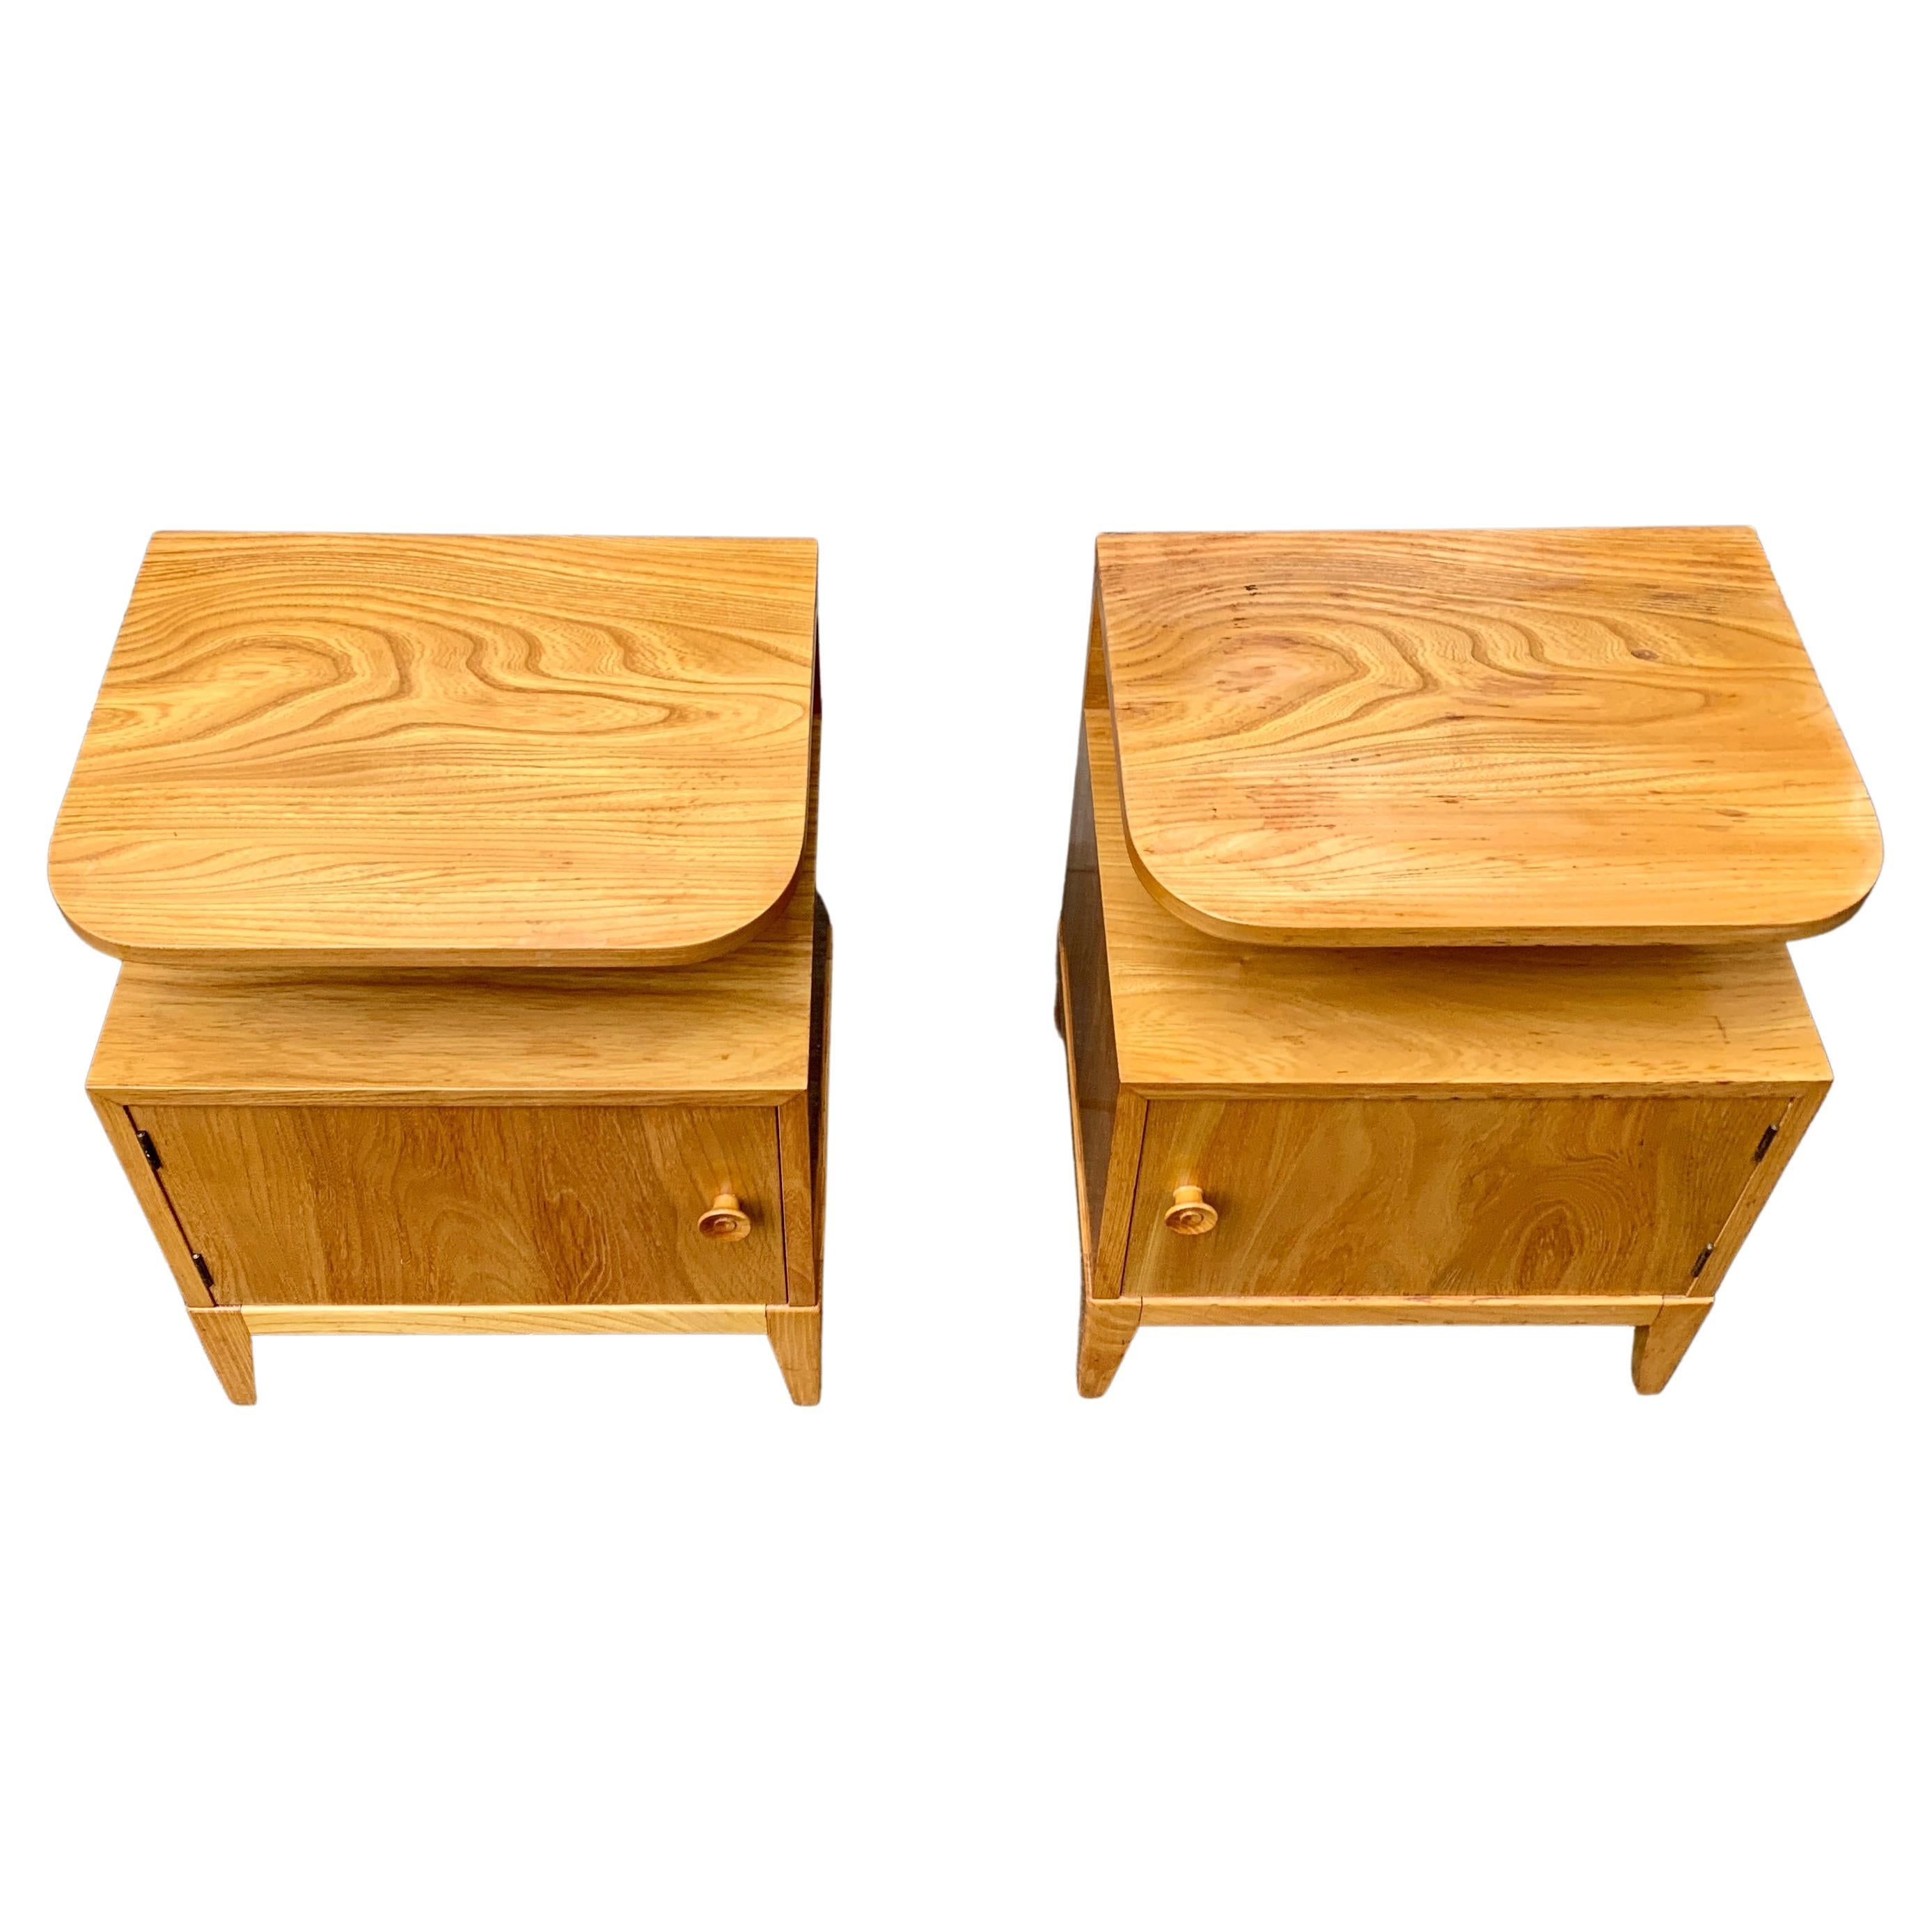 A pair of Swedish nightstands or small night tables in elm and oak wood with the original wooden handles and a shelf on top.
This set is a honest pair, meaning that the set has left and right facing doors the cabinets. They were recently bought in